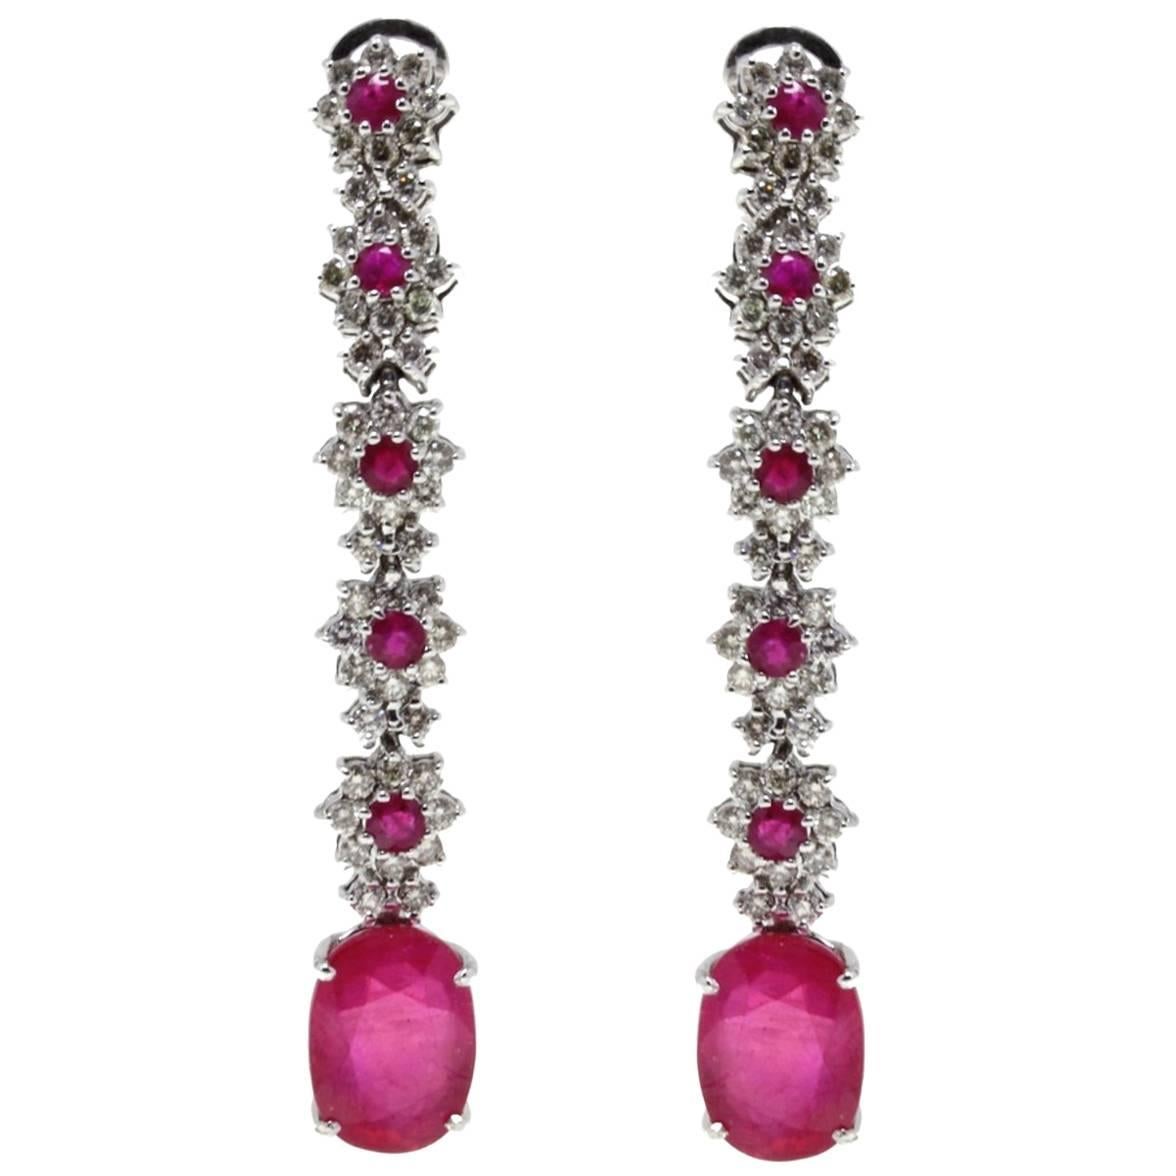 1.64 ct Diamonds, 10.78 ct Ruby White Gold Clip-on/ Drop Earrings